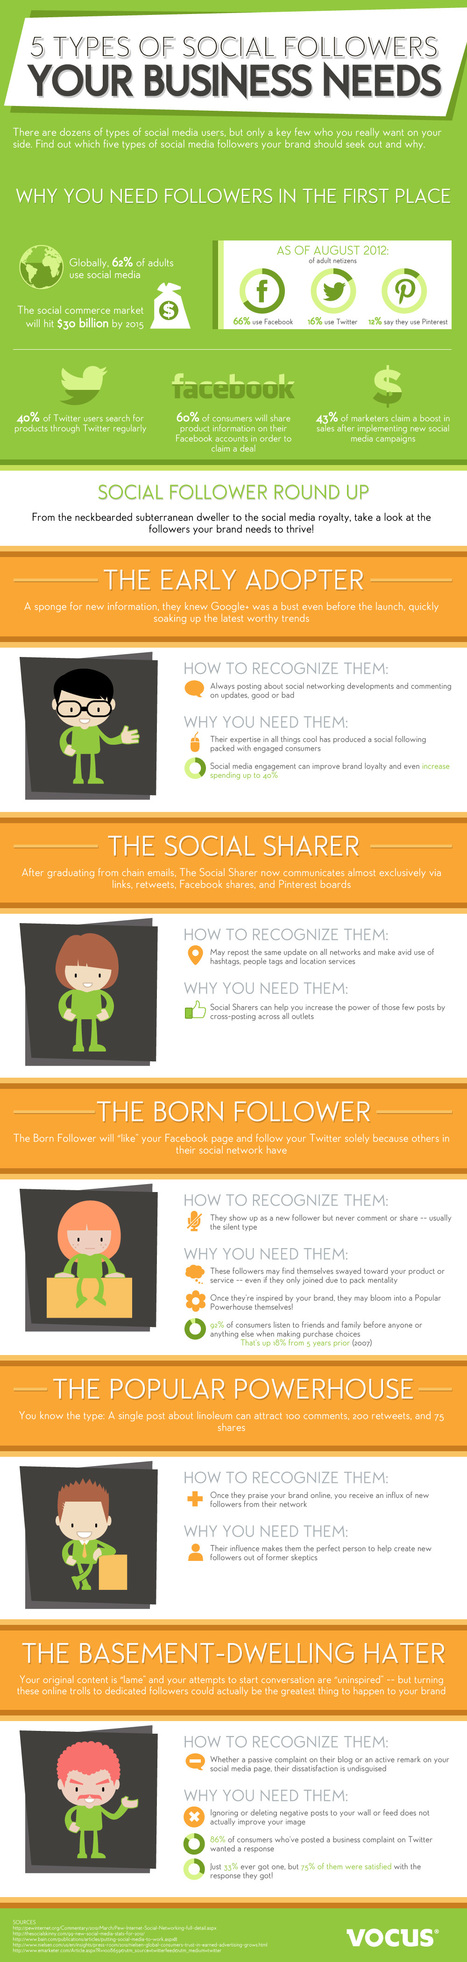 The 5 Types of Social Followers that Every Business Needs [INFOGRAPHIC] | WEBOLUTION! | Scoop.it